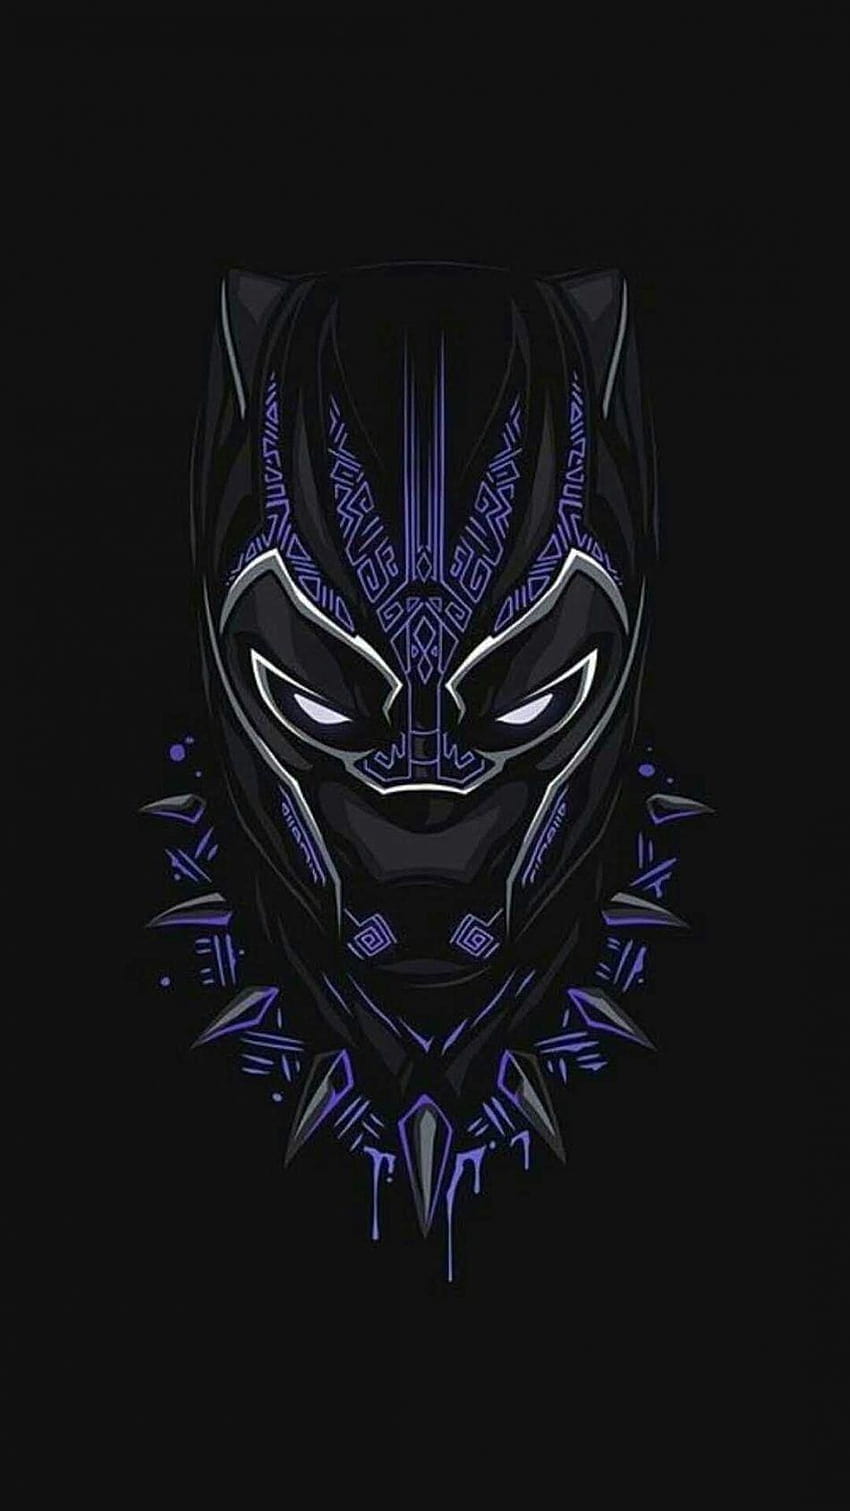 In honour of the king... RIP in 2020, black panther rip HD phone wallpaper